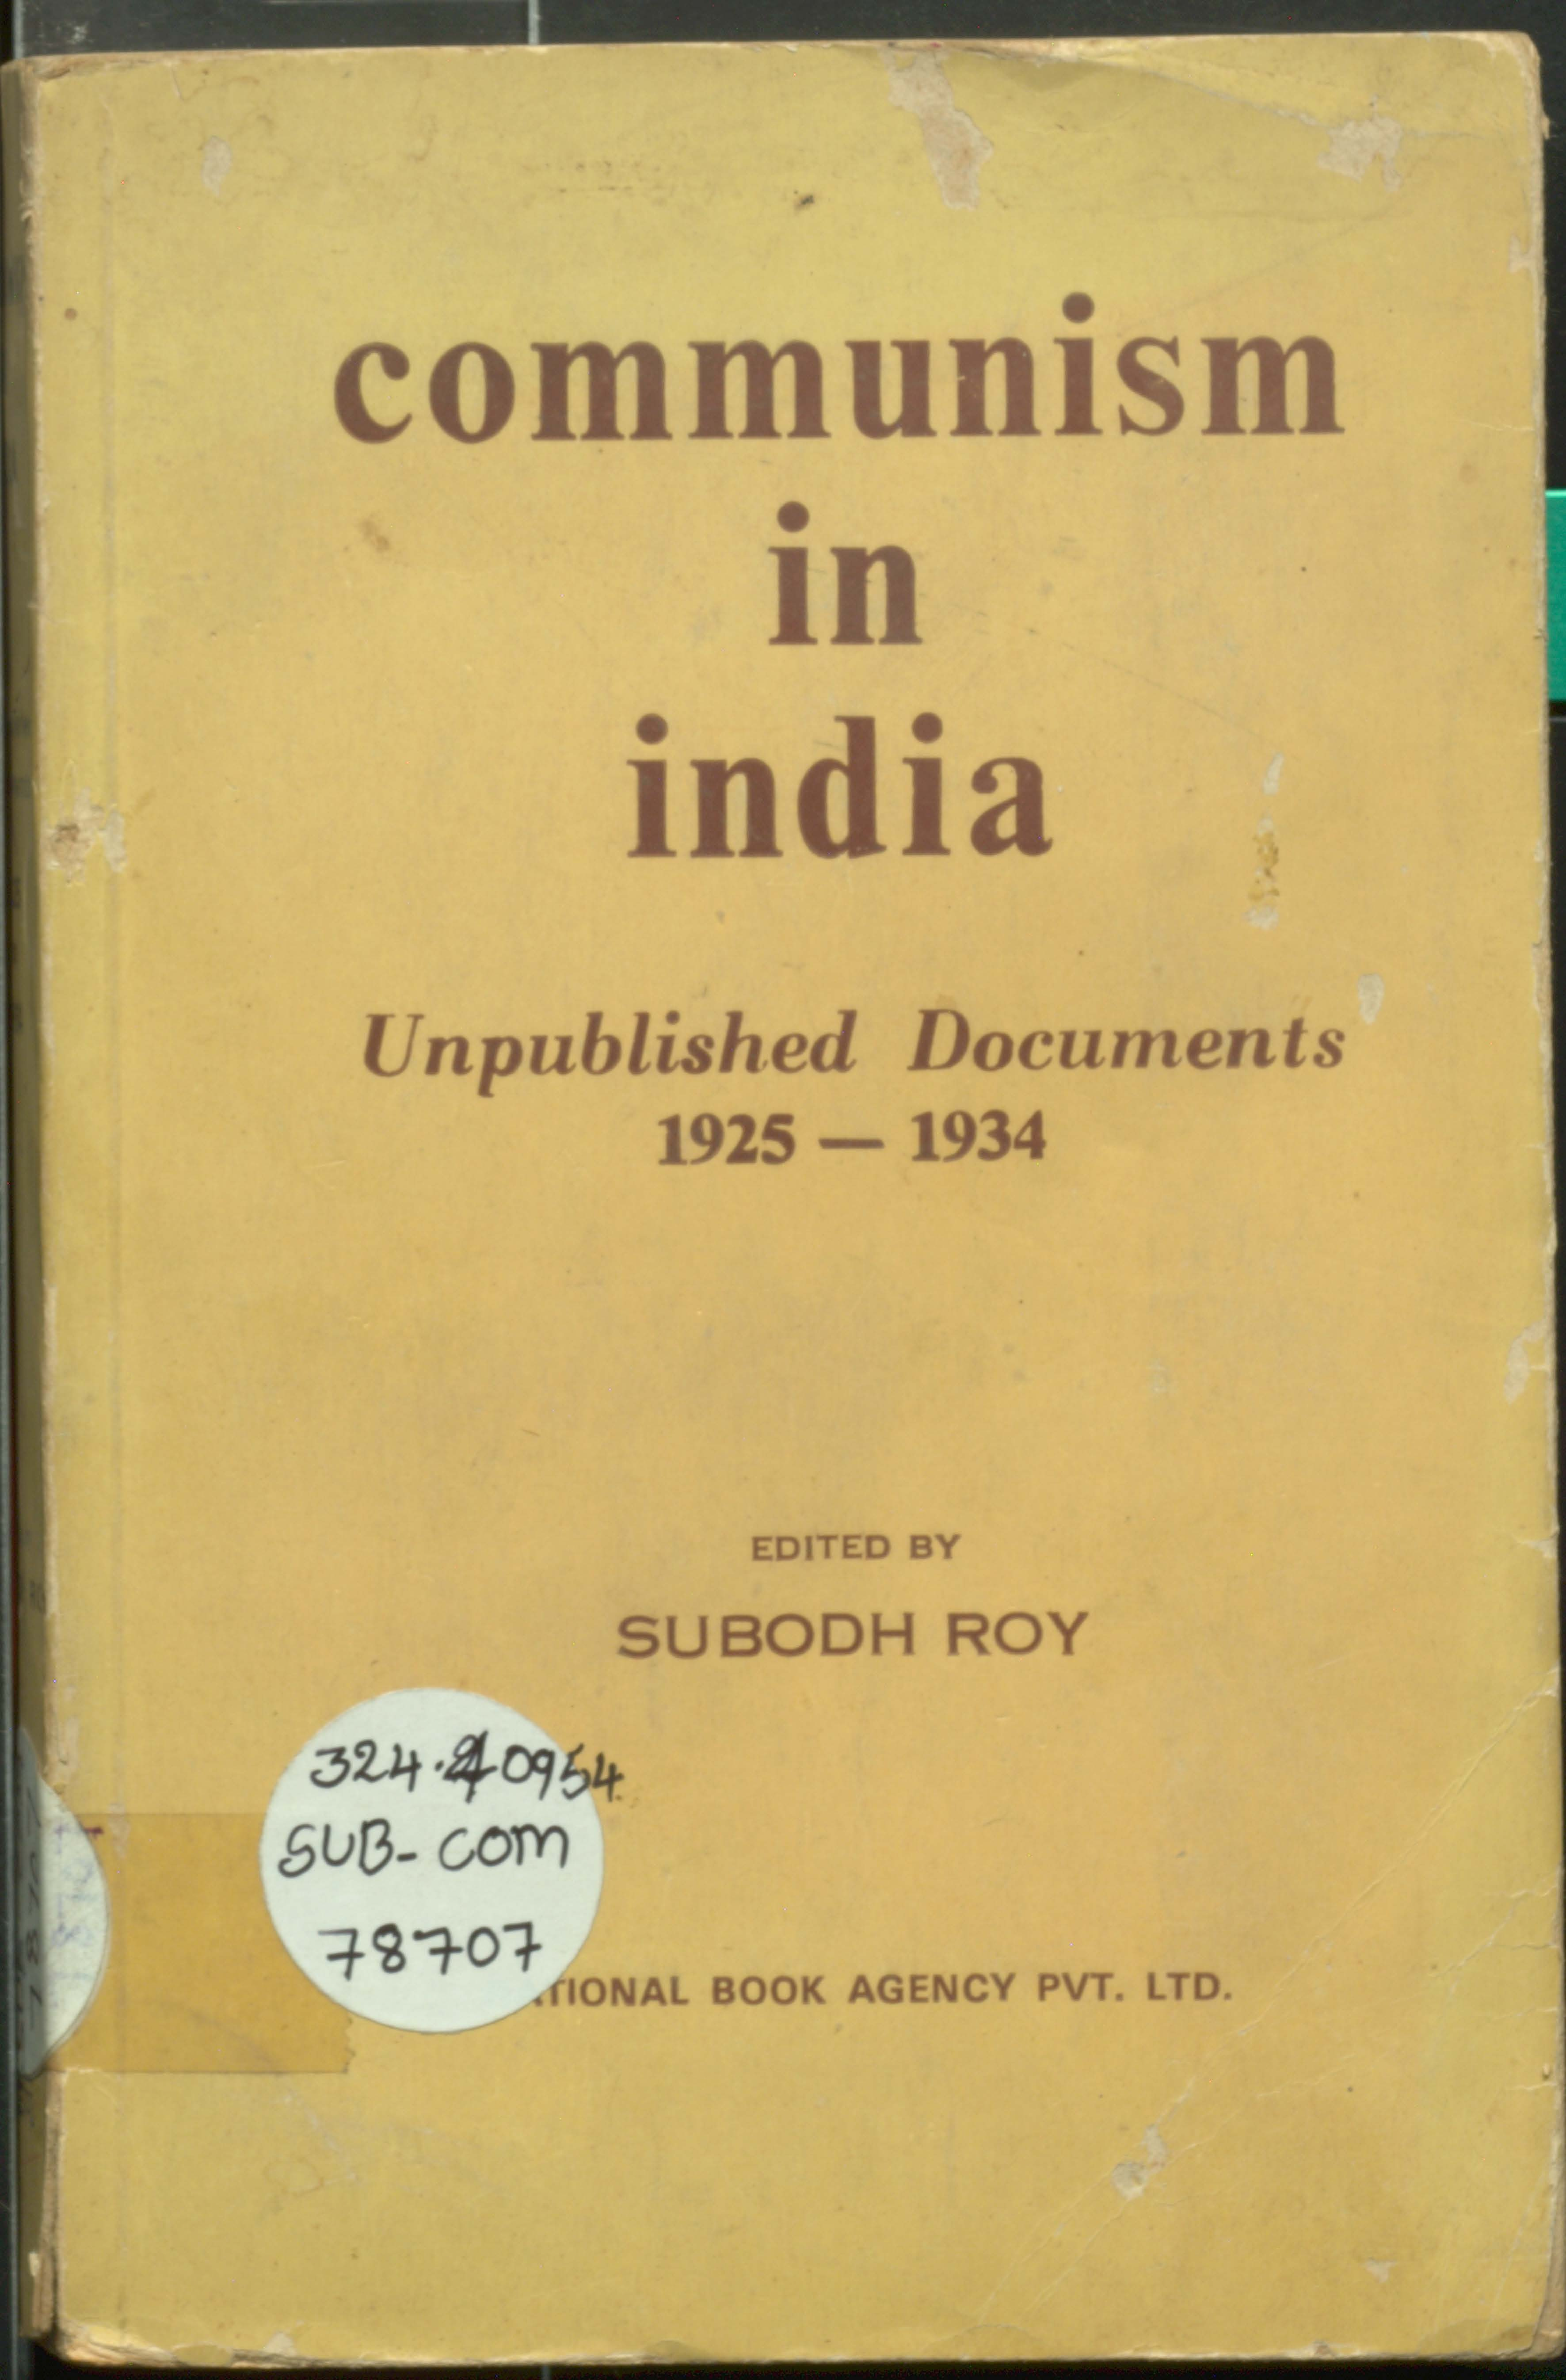 COMMUNISM IN INDIA unpublished Documents 1925-1934